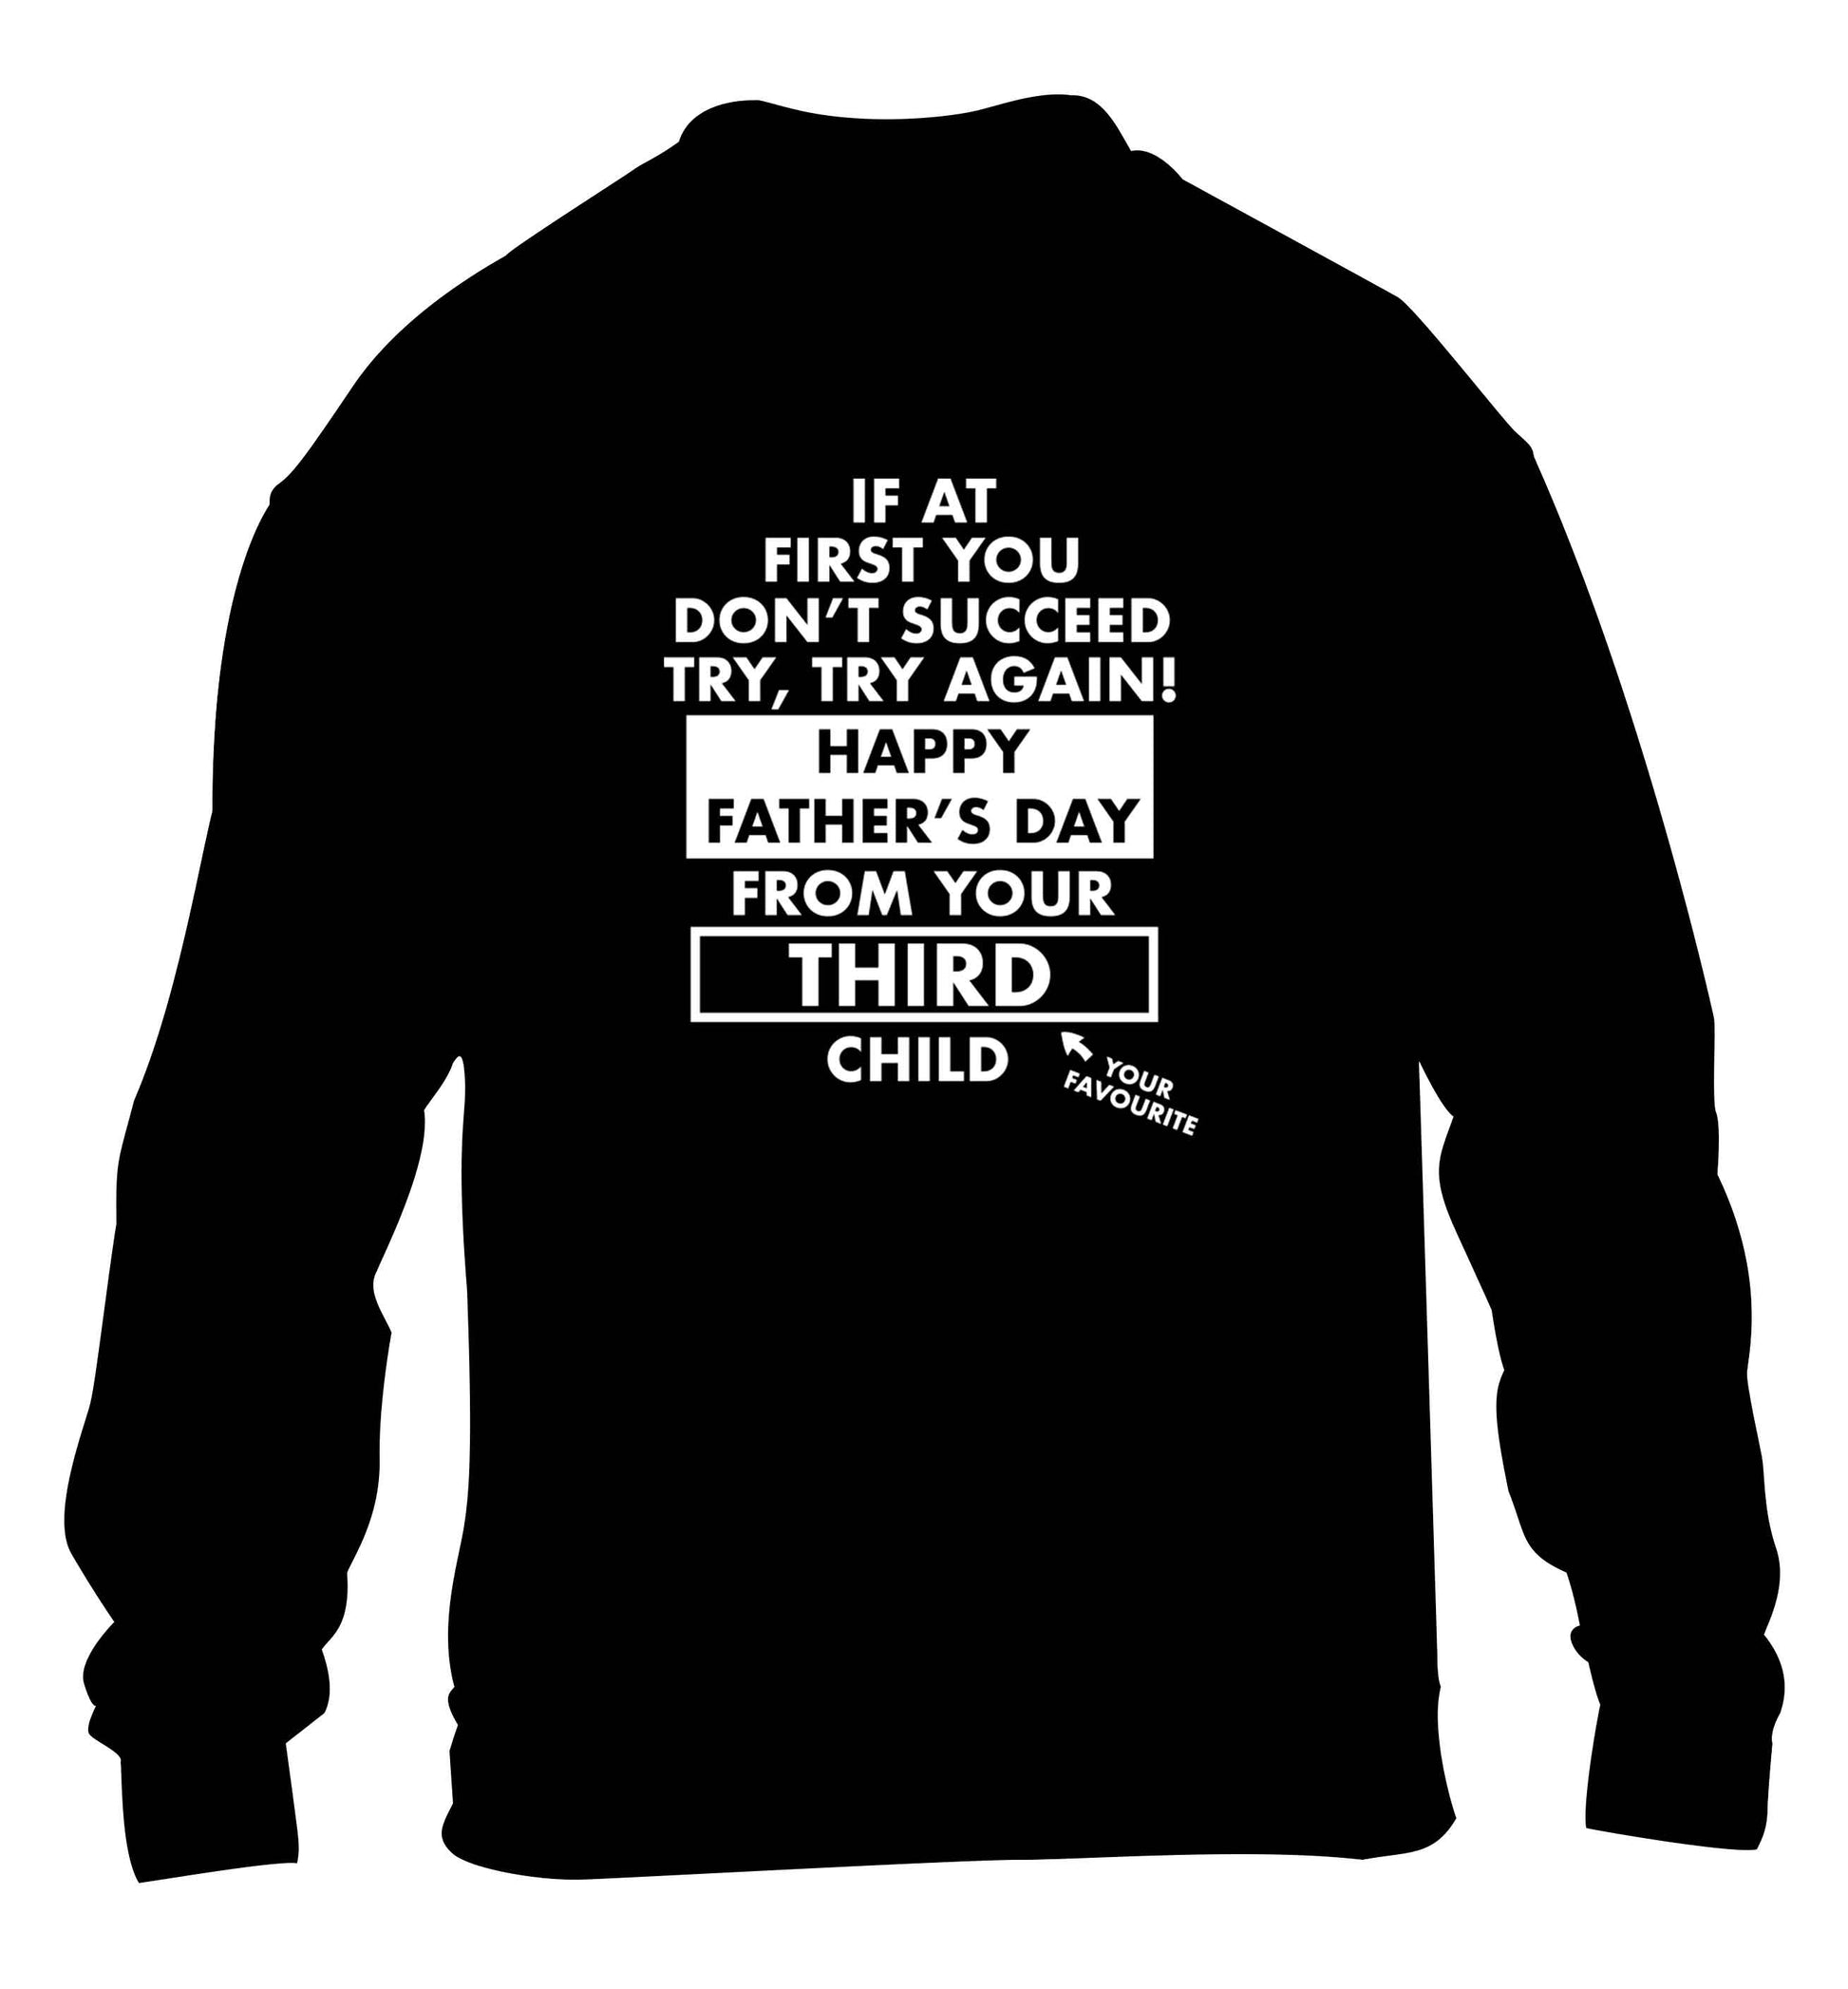 If at first you don't succeed try, try again Happy Father's day from your third child! children's black sweater 12-13 Years